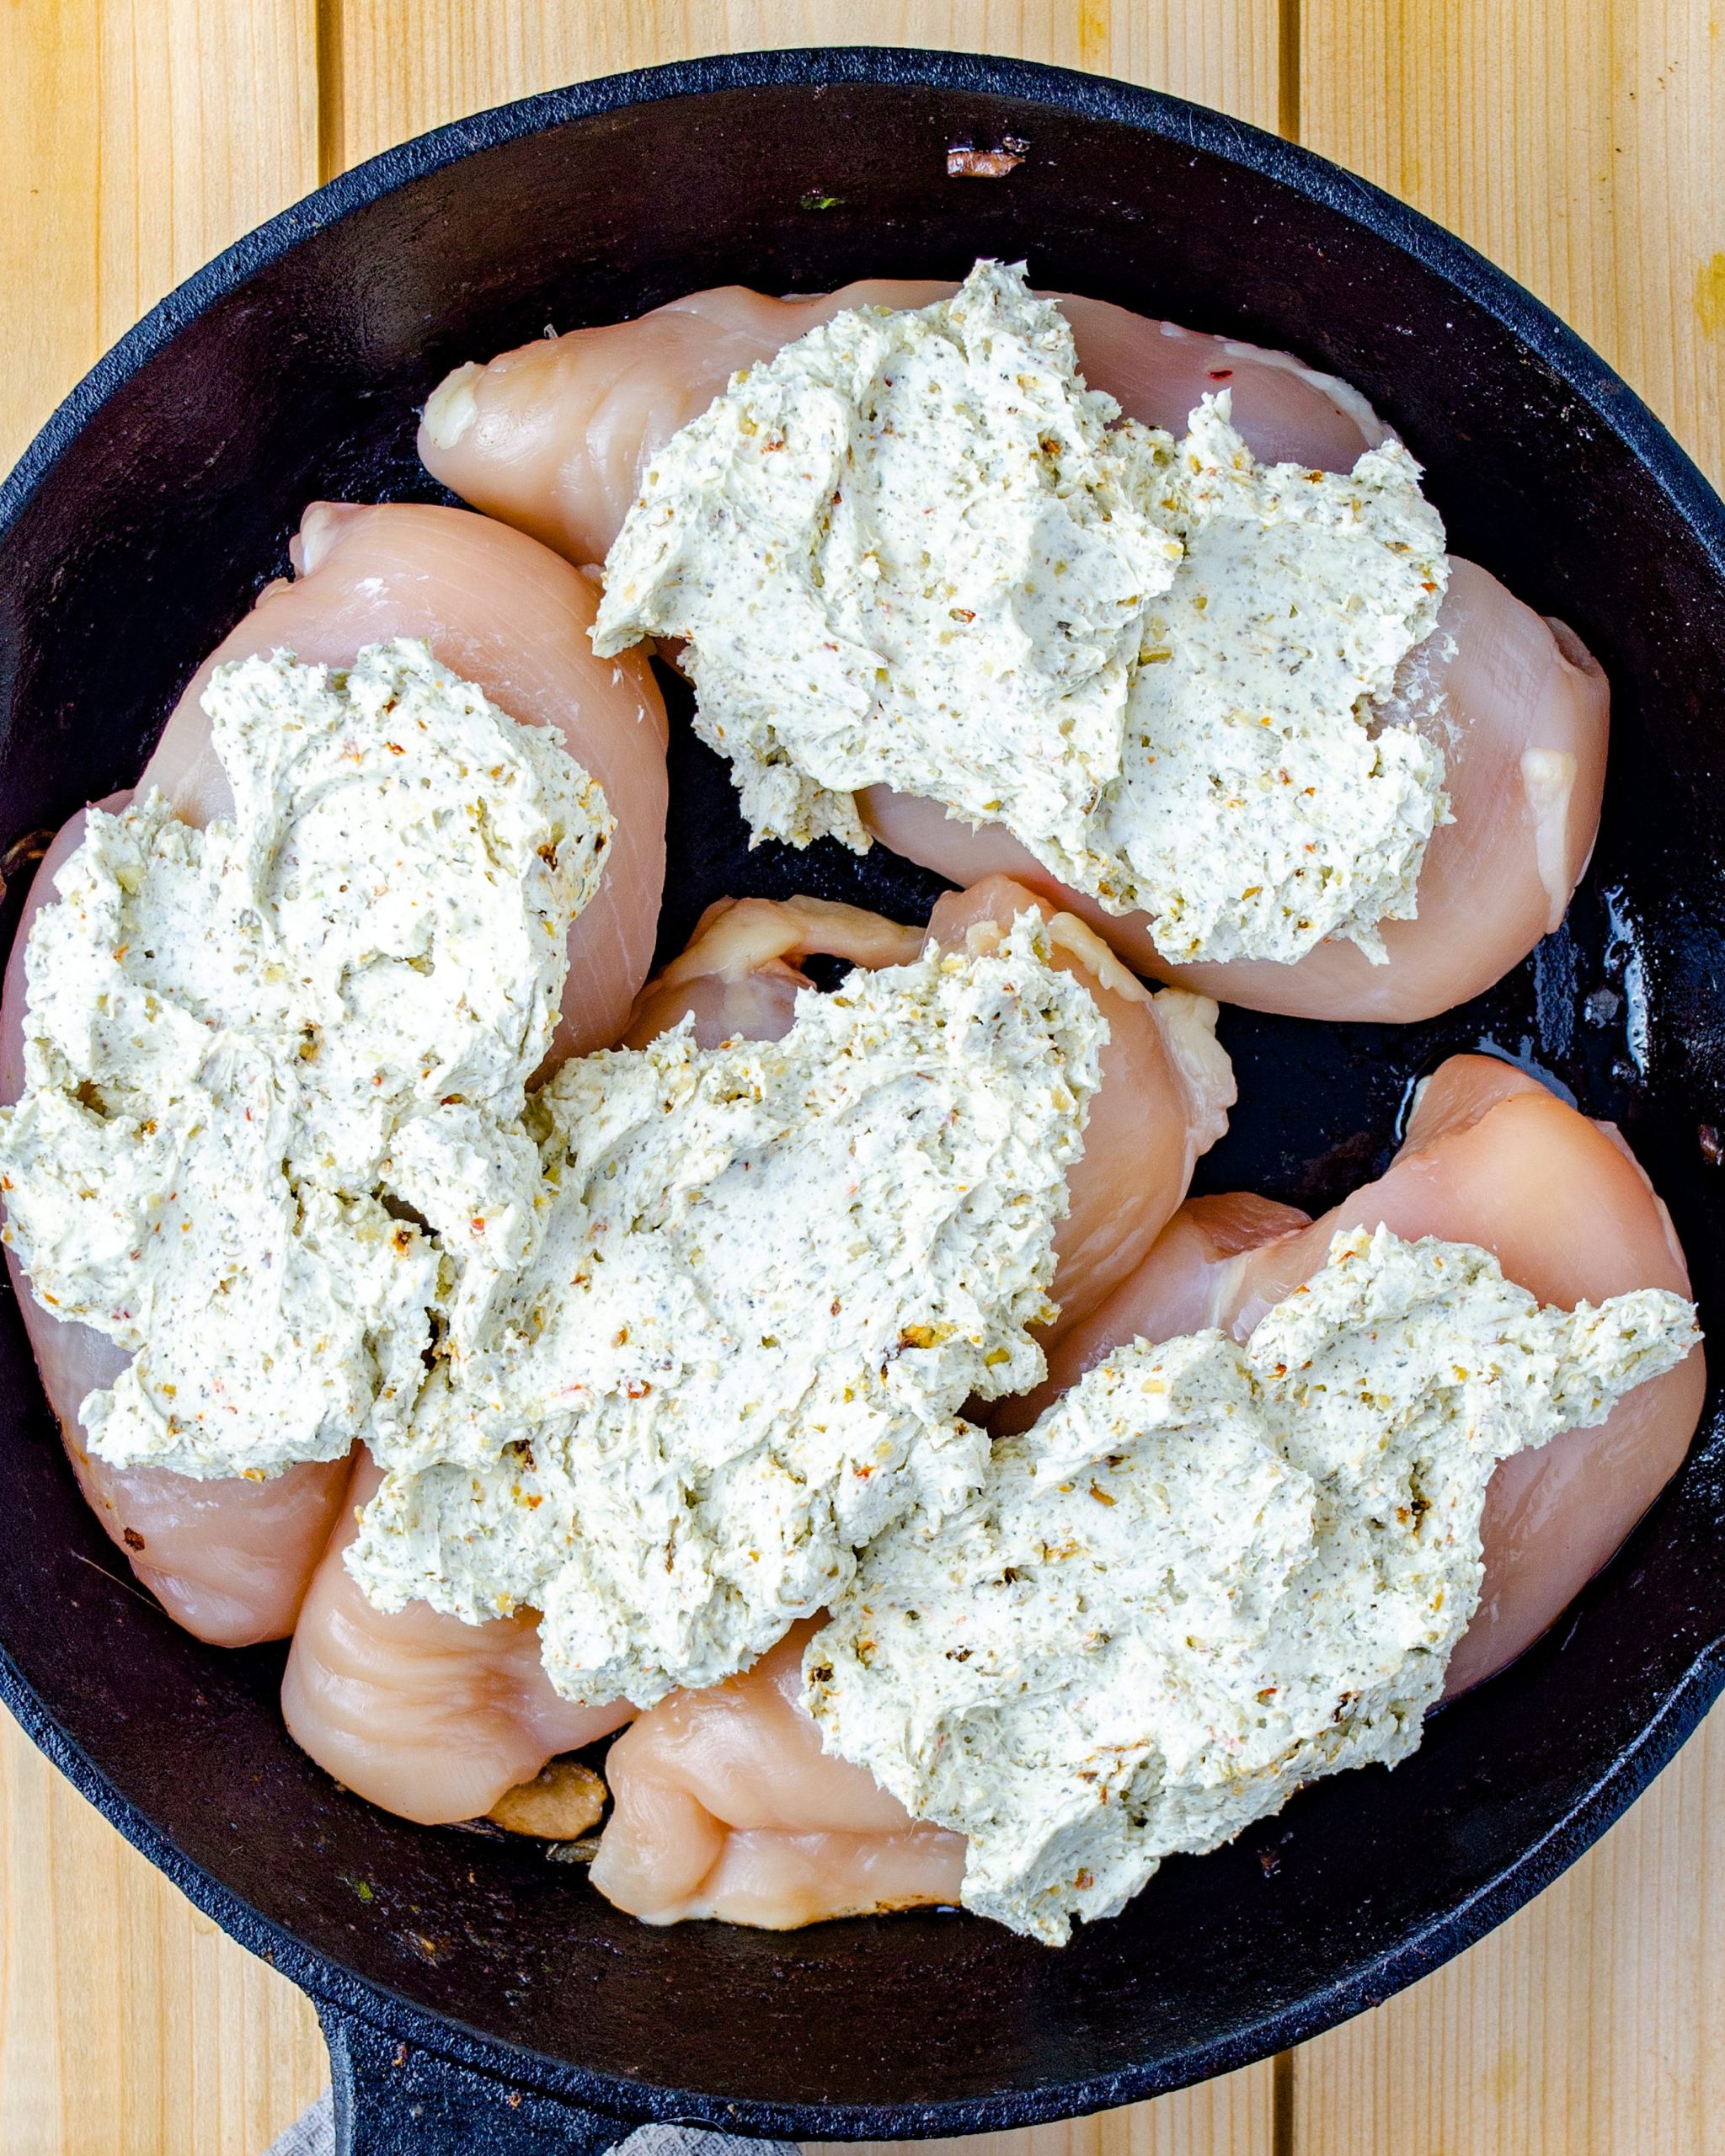 Place the chicken breasts into a well-greased baking dish, and top each one with an equal portion of the cream cheese mixture. 